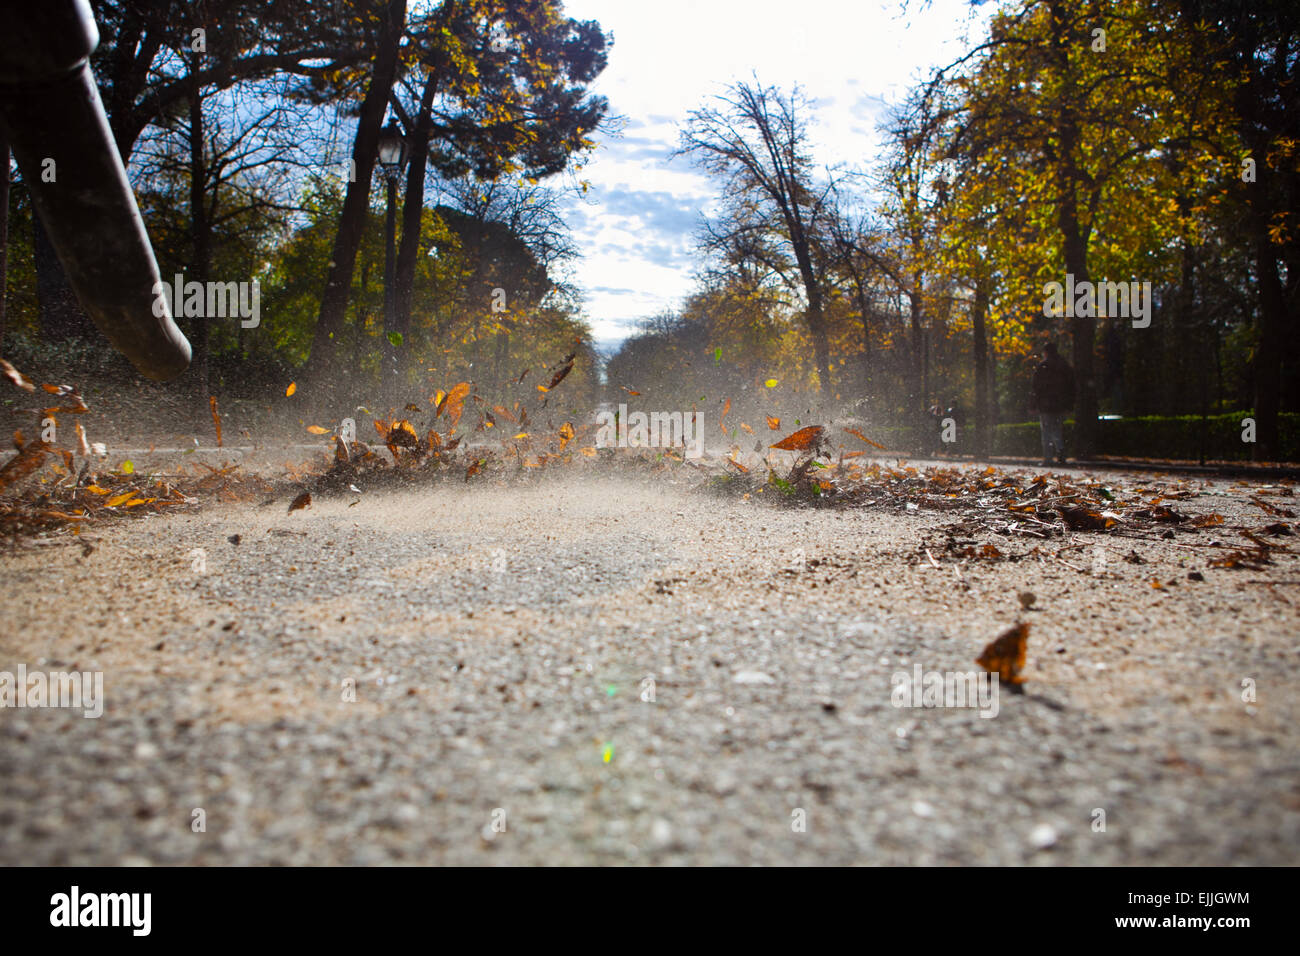 Worker in autumn with a leaf blower. Retiro park, Spain Stock Photo